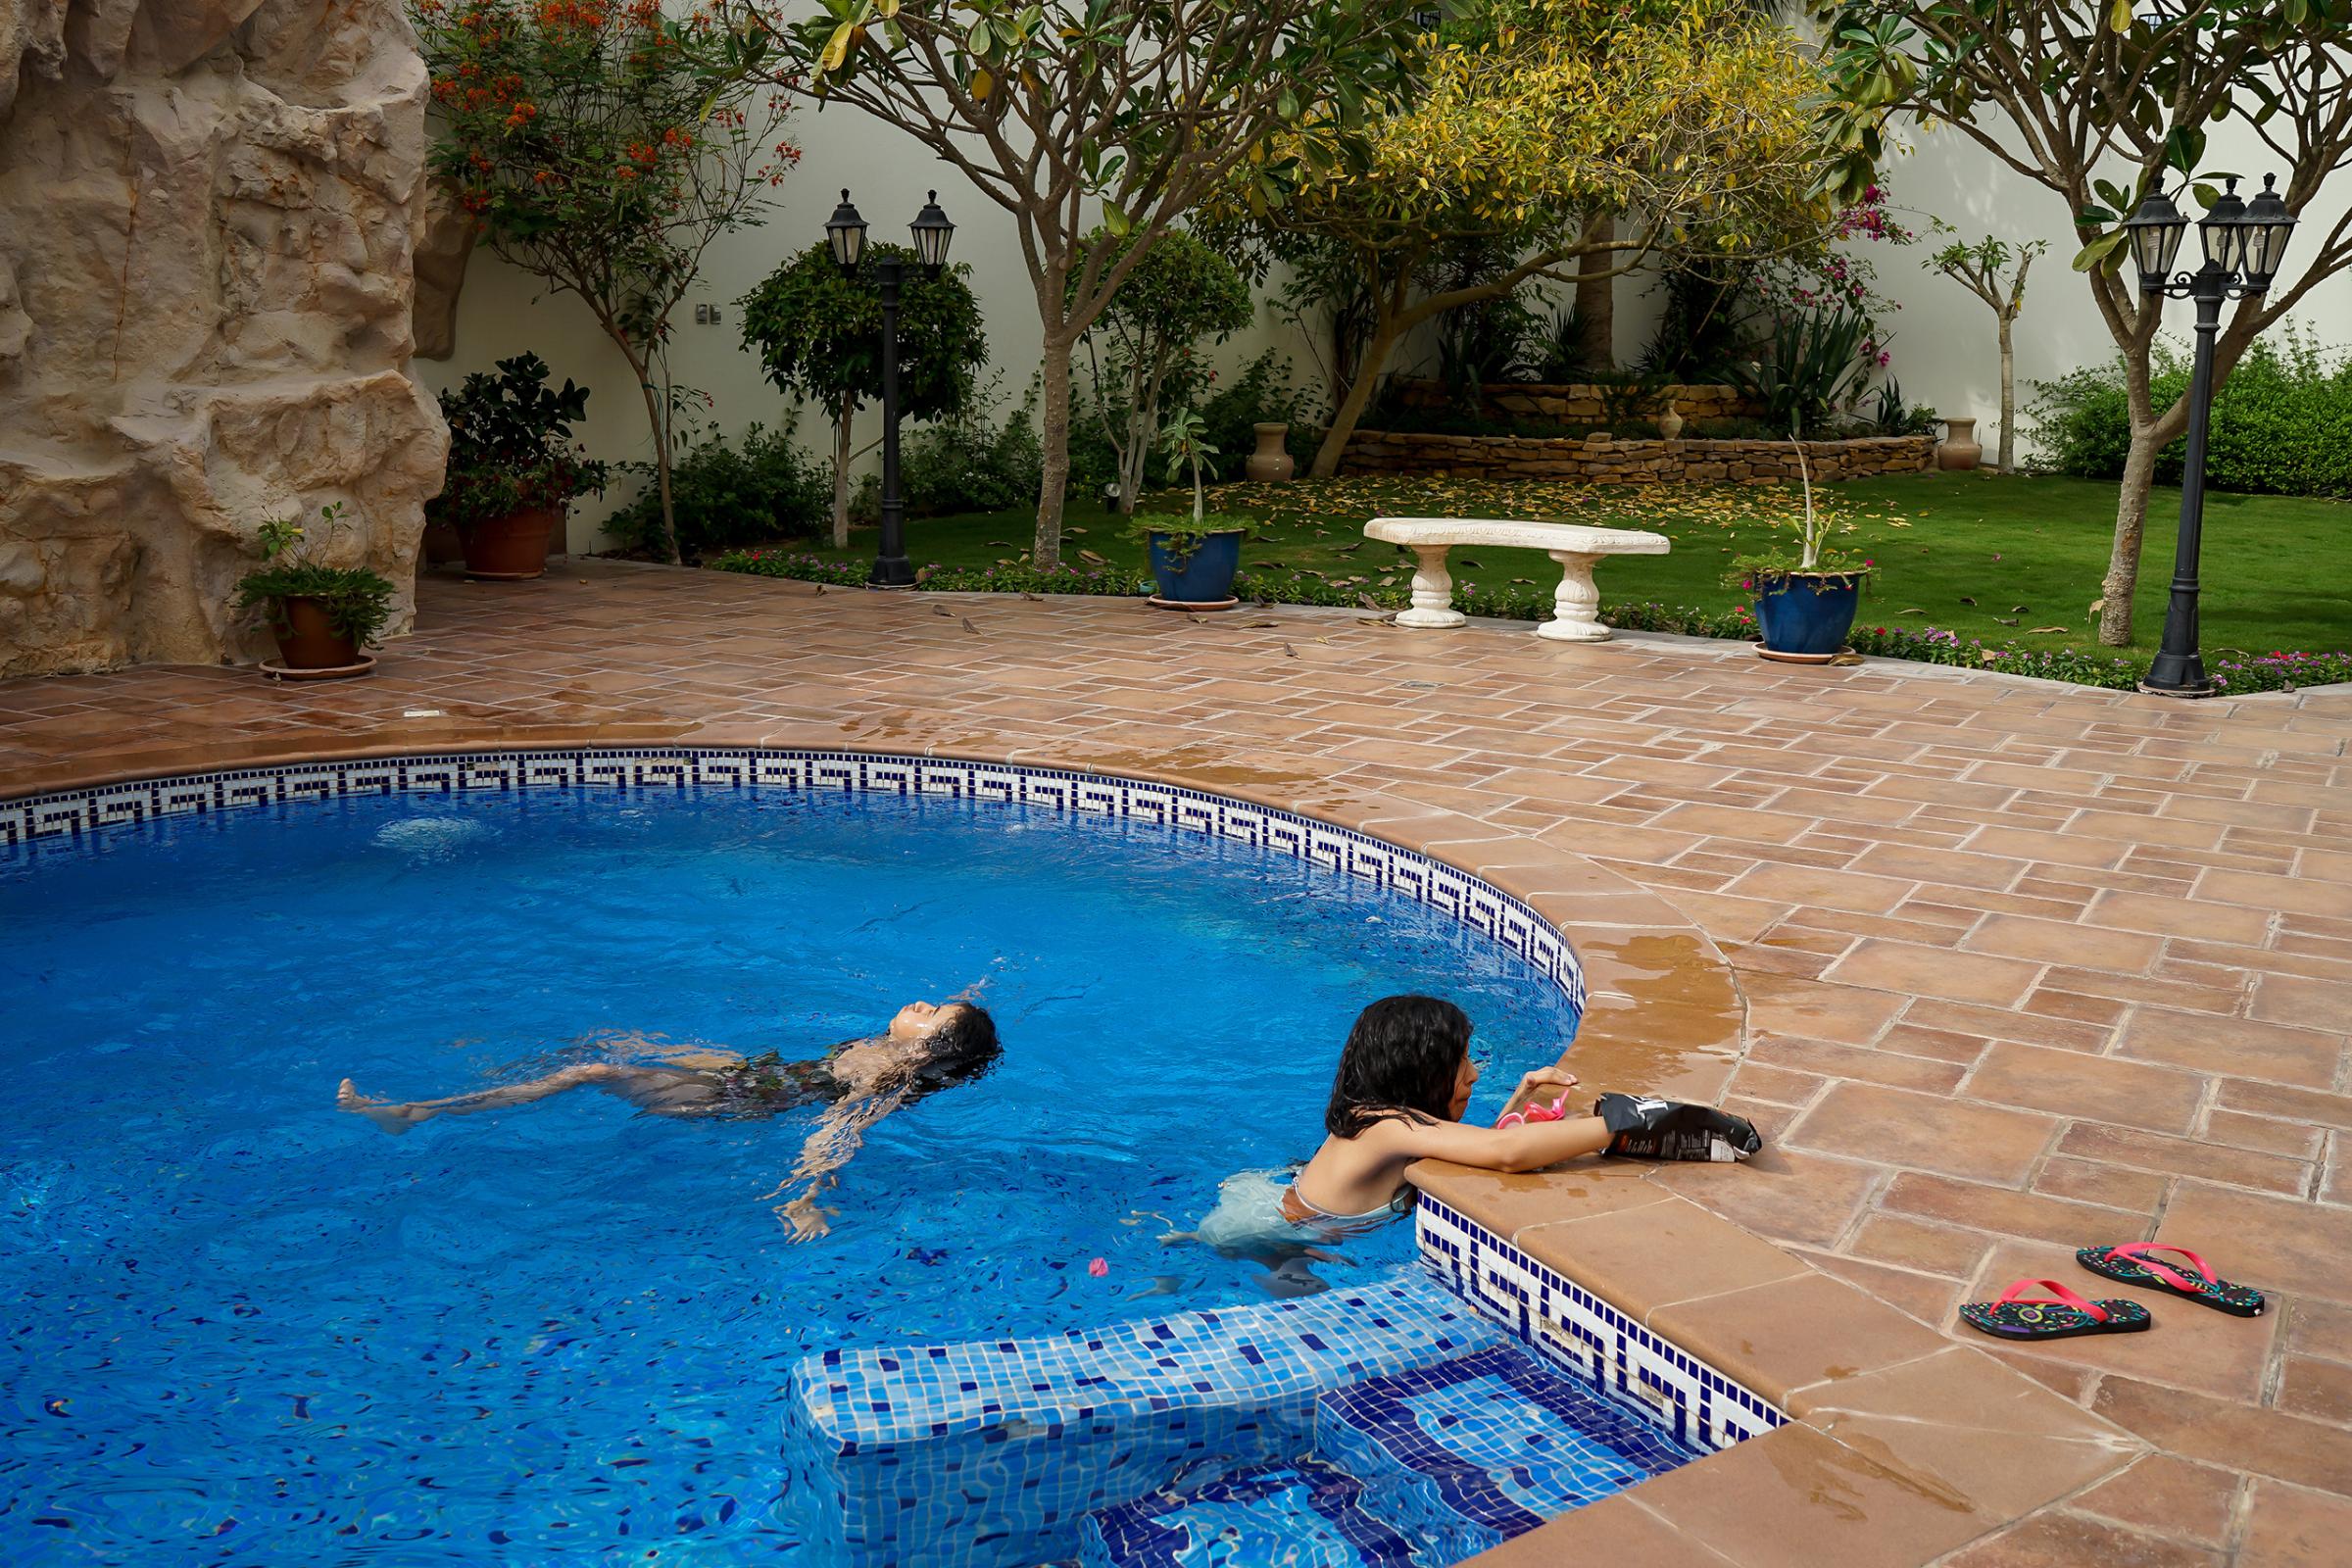 The photographer's daughters, Sura and Yara, swim in a pool at a friend's home in Dhahran, Saudi Arabia, April 2016. "They lay there, free, and careless," Alsultan says. "There's no public pools for women, neither is there any beach spaces for women only. Only privately owned or very expensive clubs that is not available to Saudis."